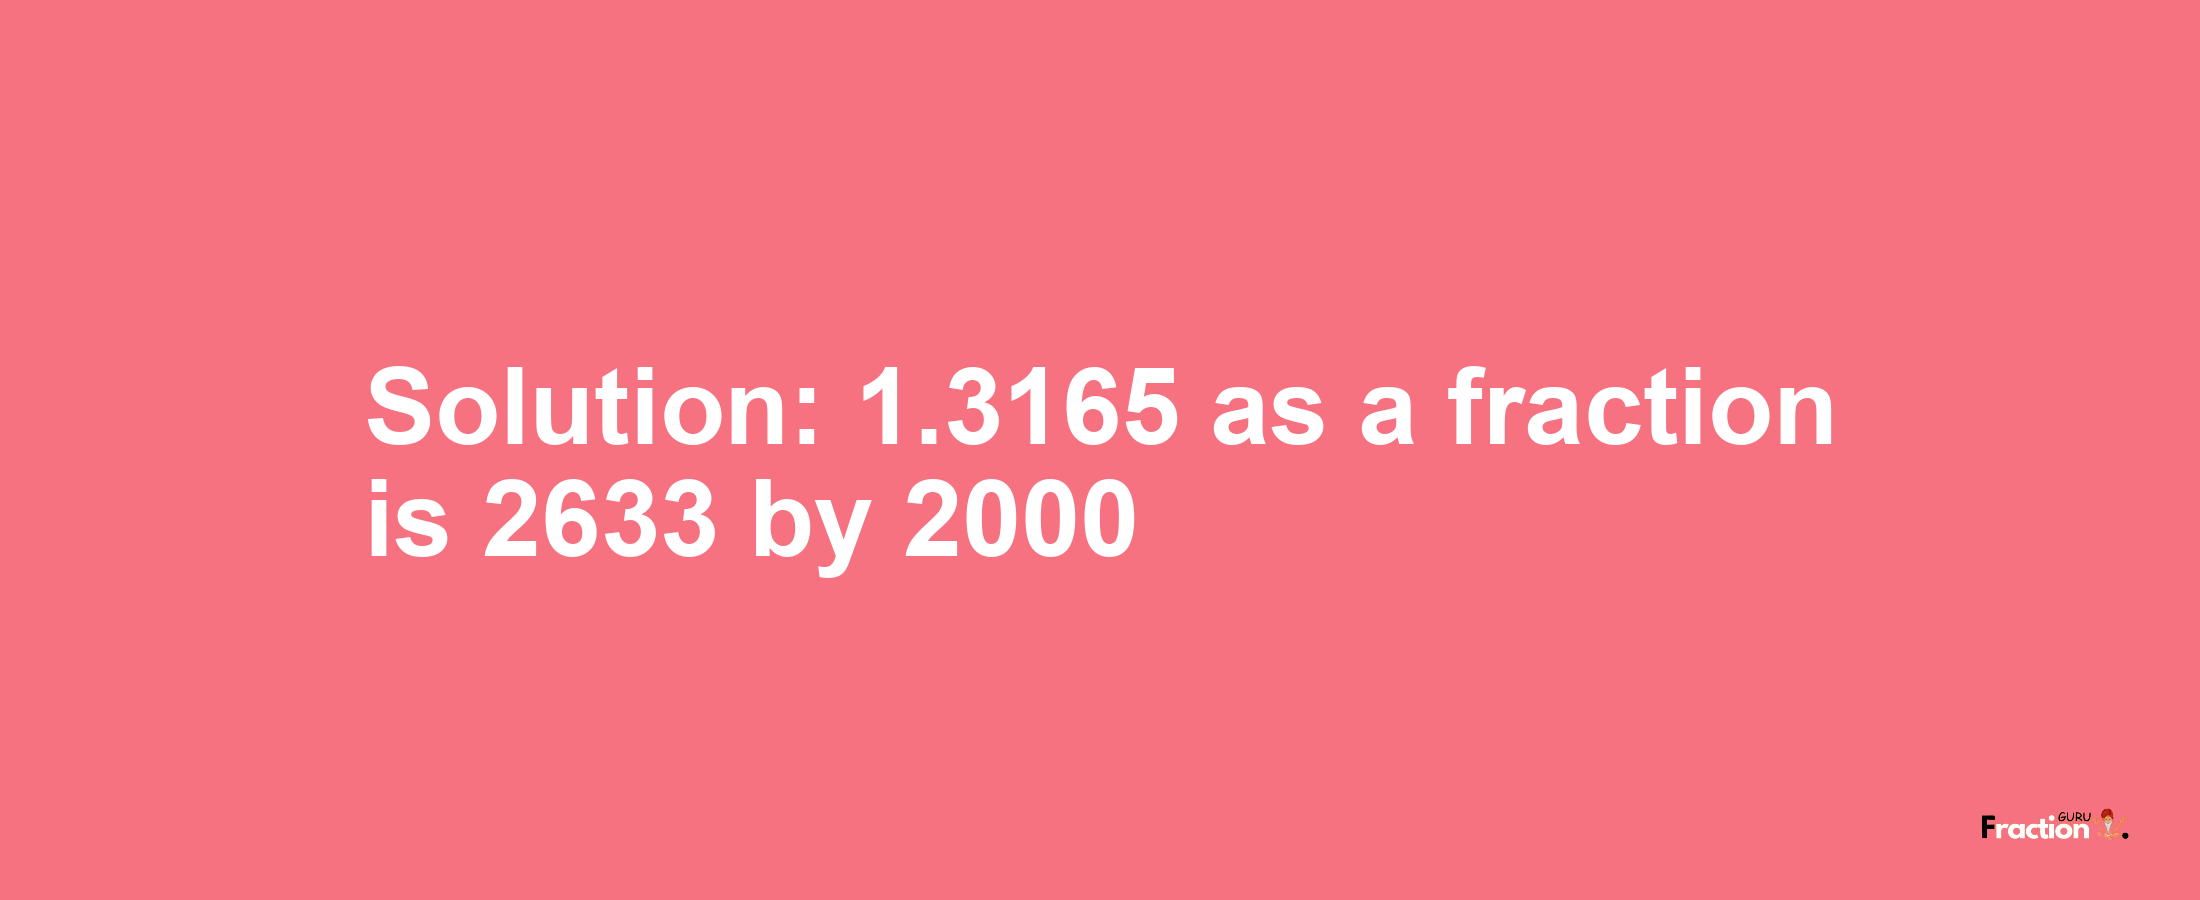 Solution:1.3165 as a fraction is 2633/2000